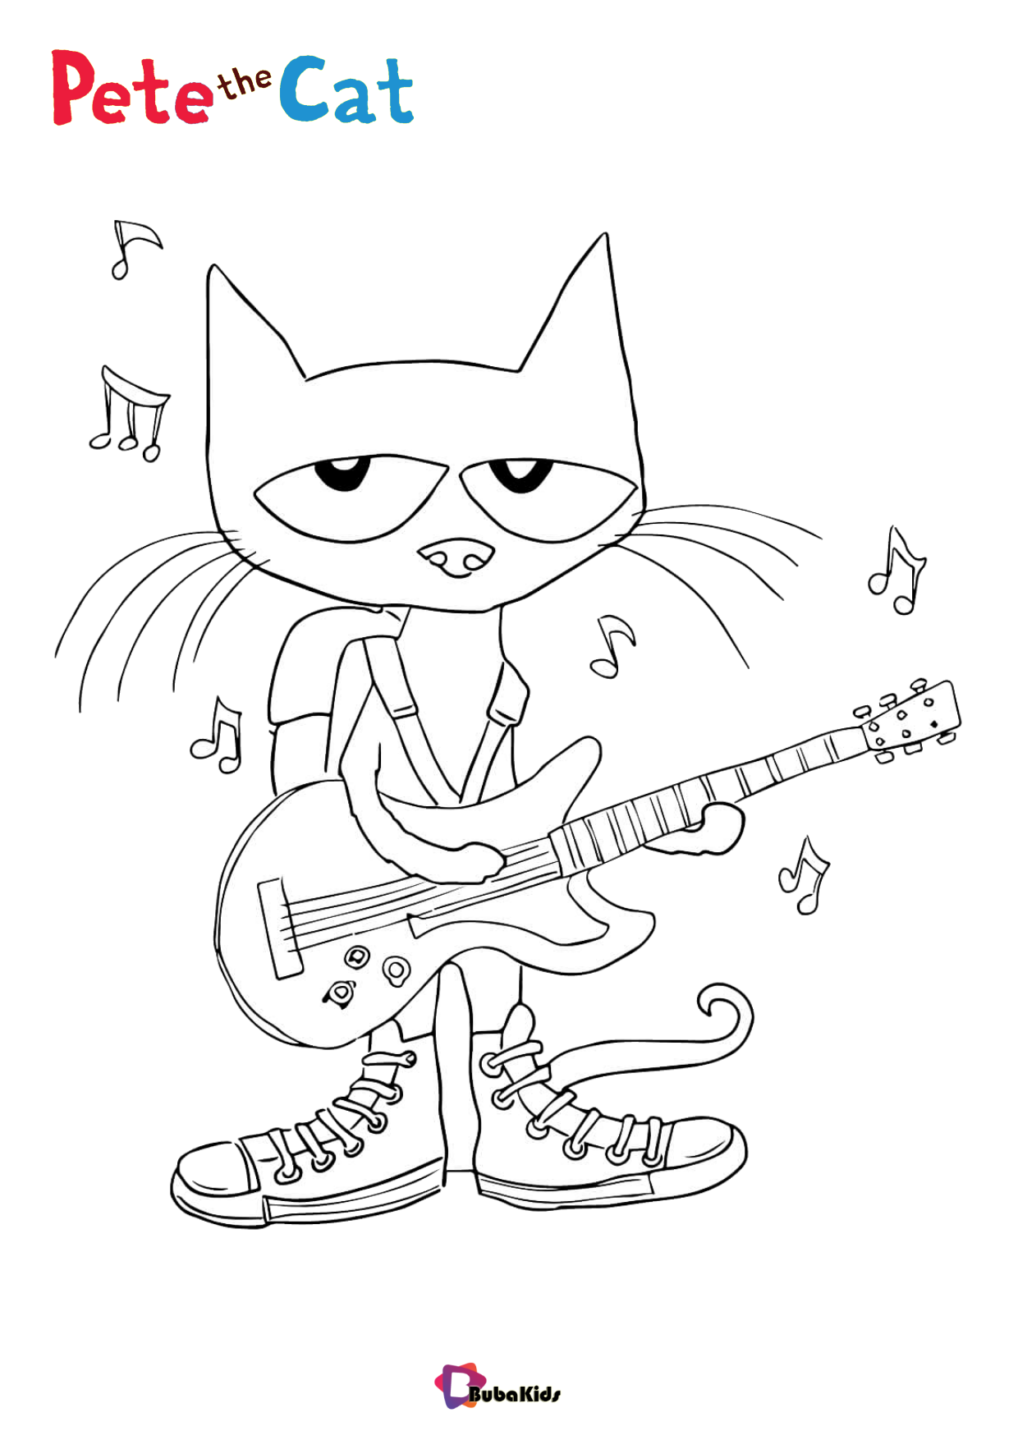 pete the cat playing guitar coloring page cartoon cat